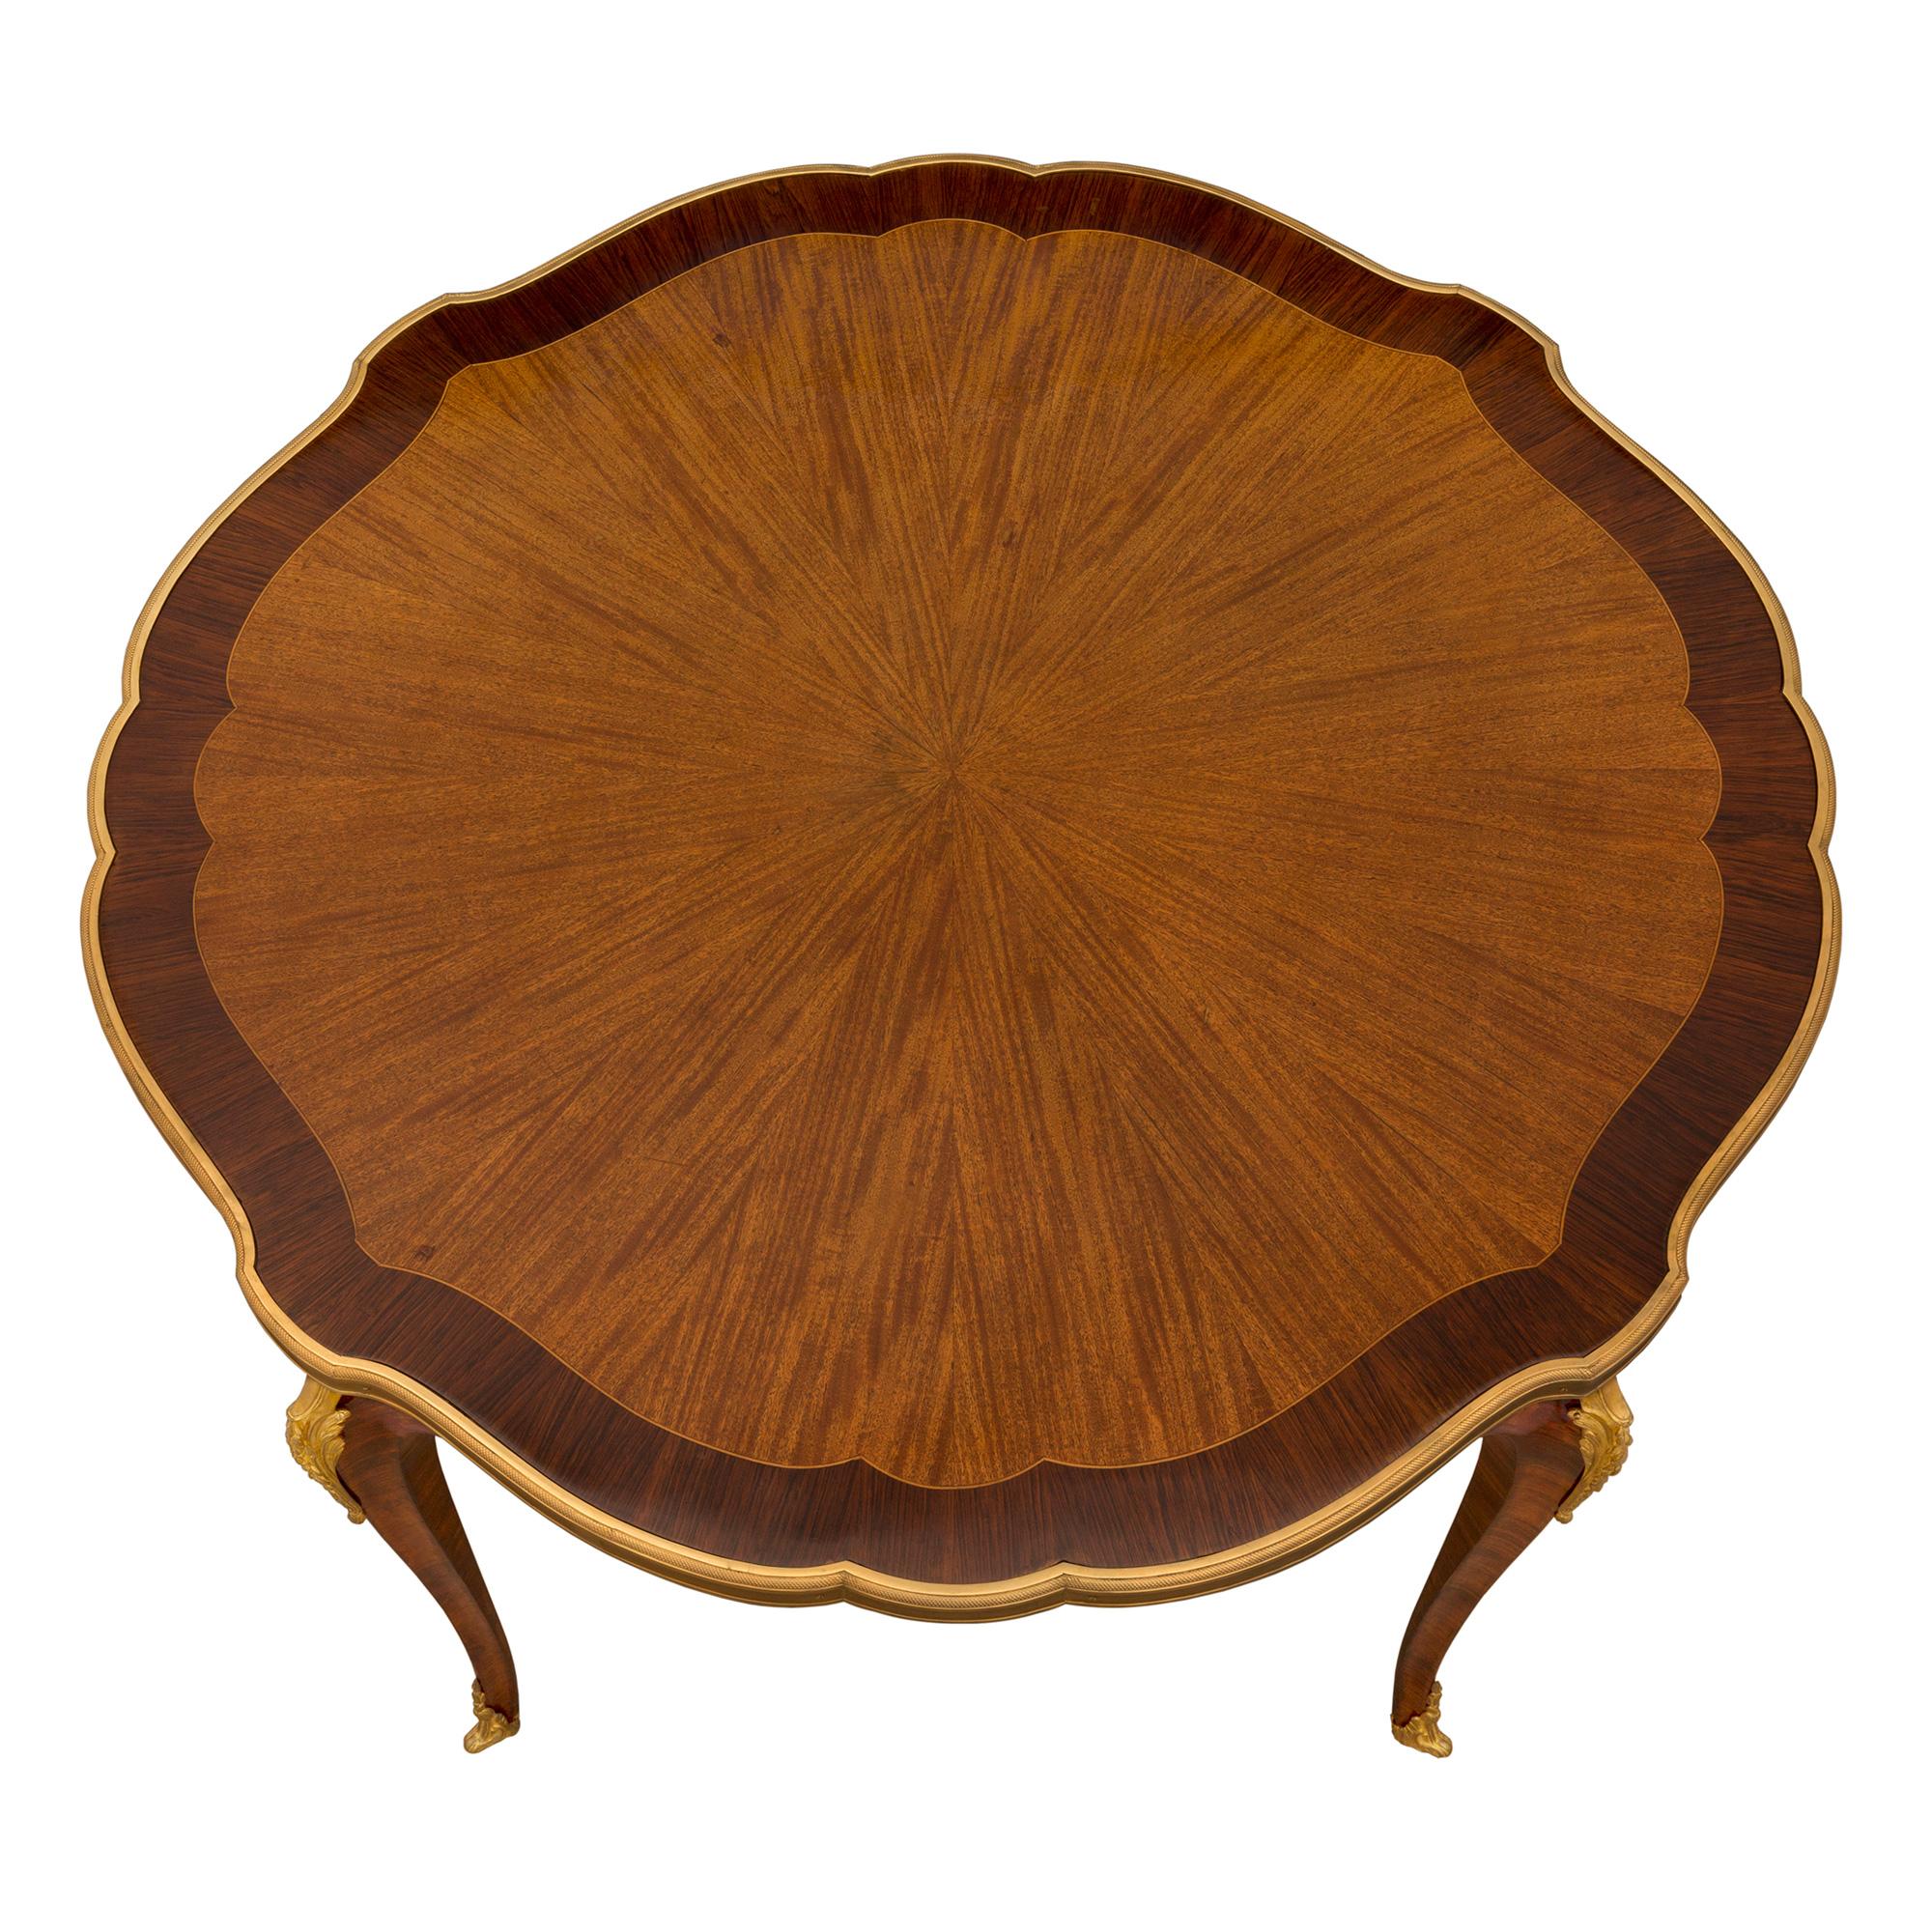 An extremely elegant French 19th century Louis XV st. tulipwood, kingwood and ormolu circular cocktail/coffee table. The table is raised by four slender cabriole legs showcasing the beautiful kingwood grain, with fine wrap around ormolu sabots and